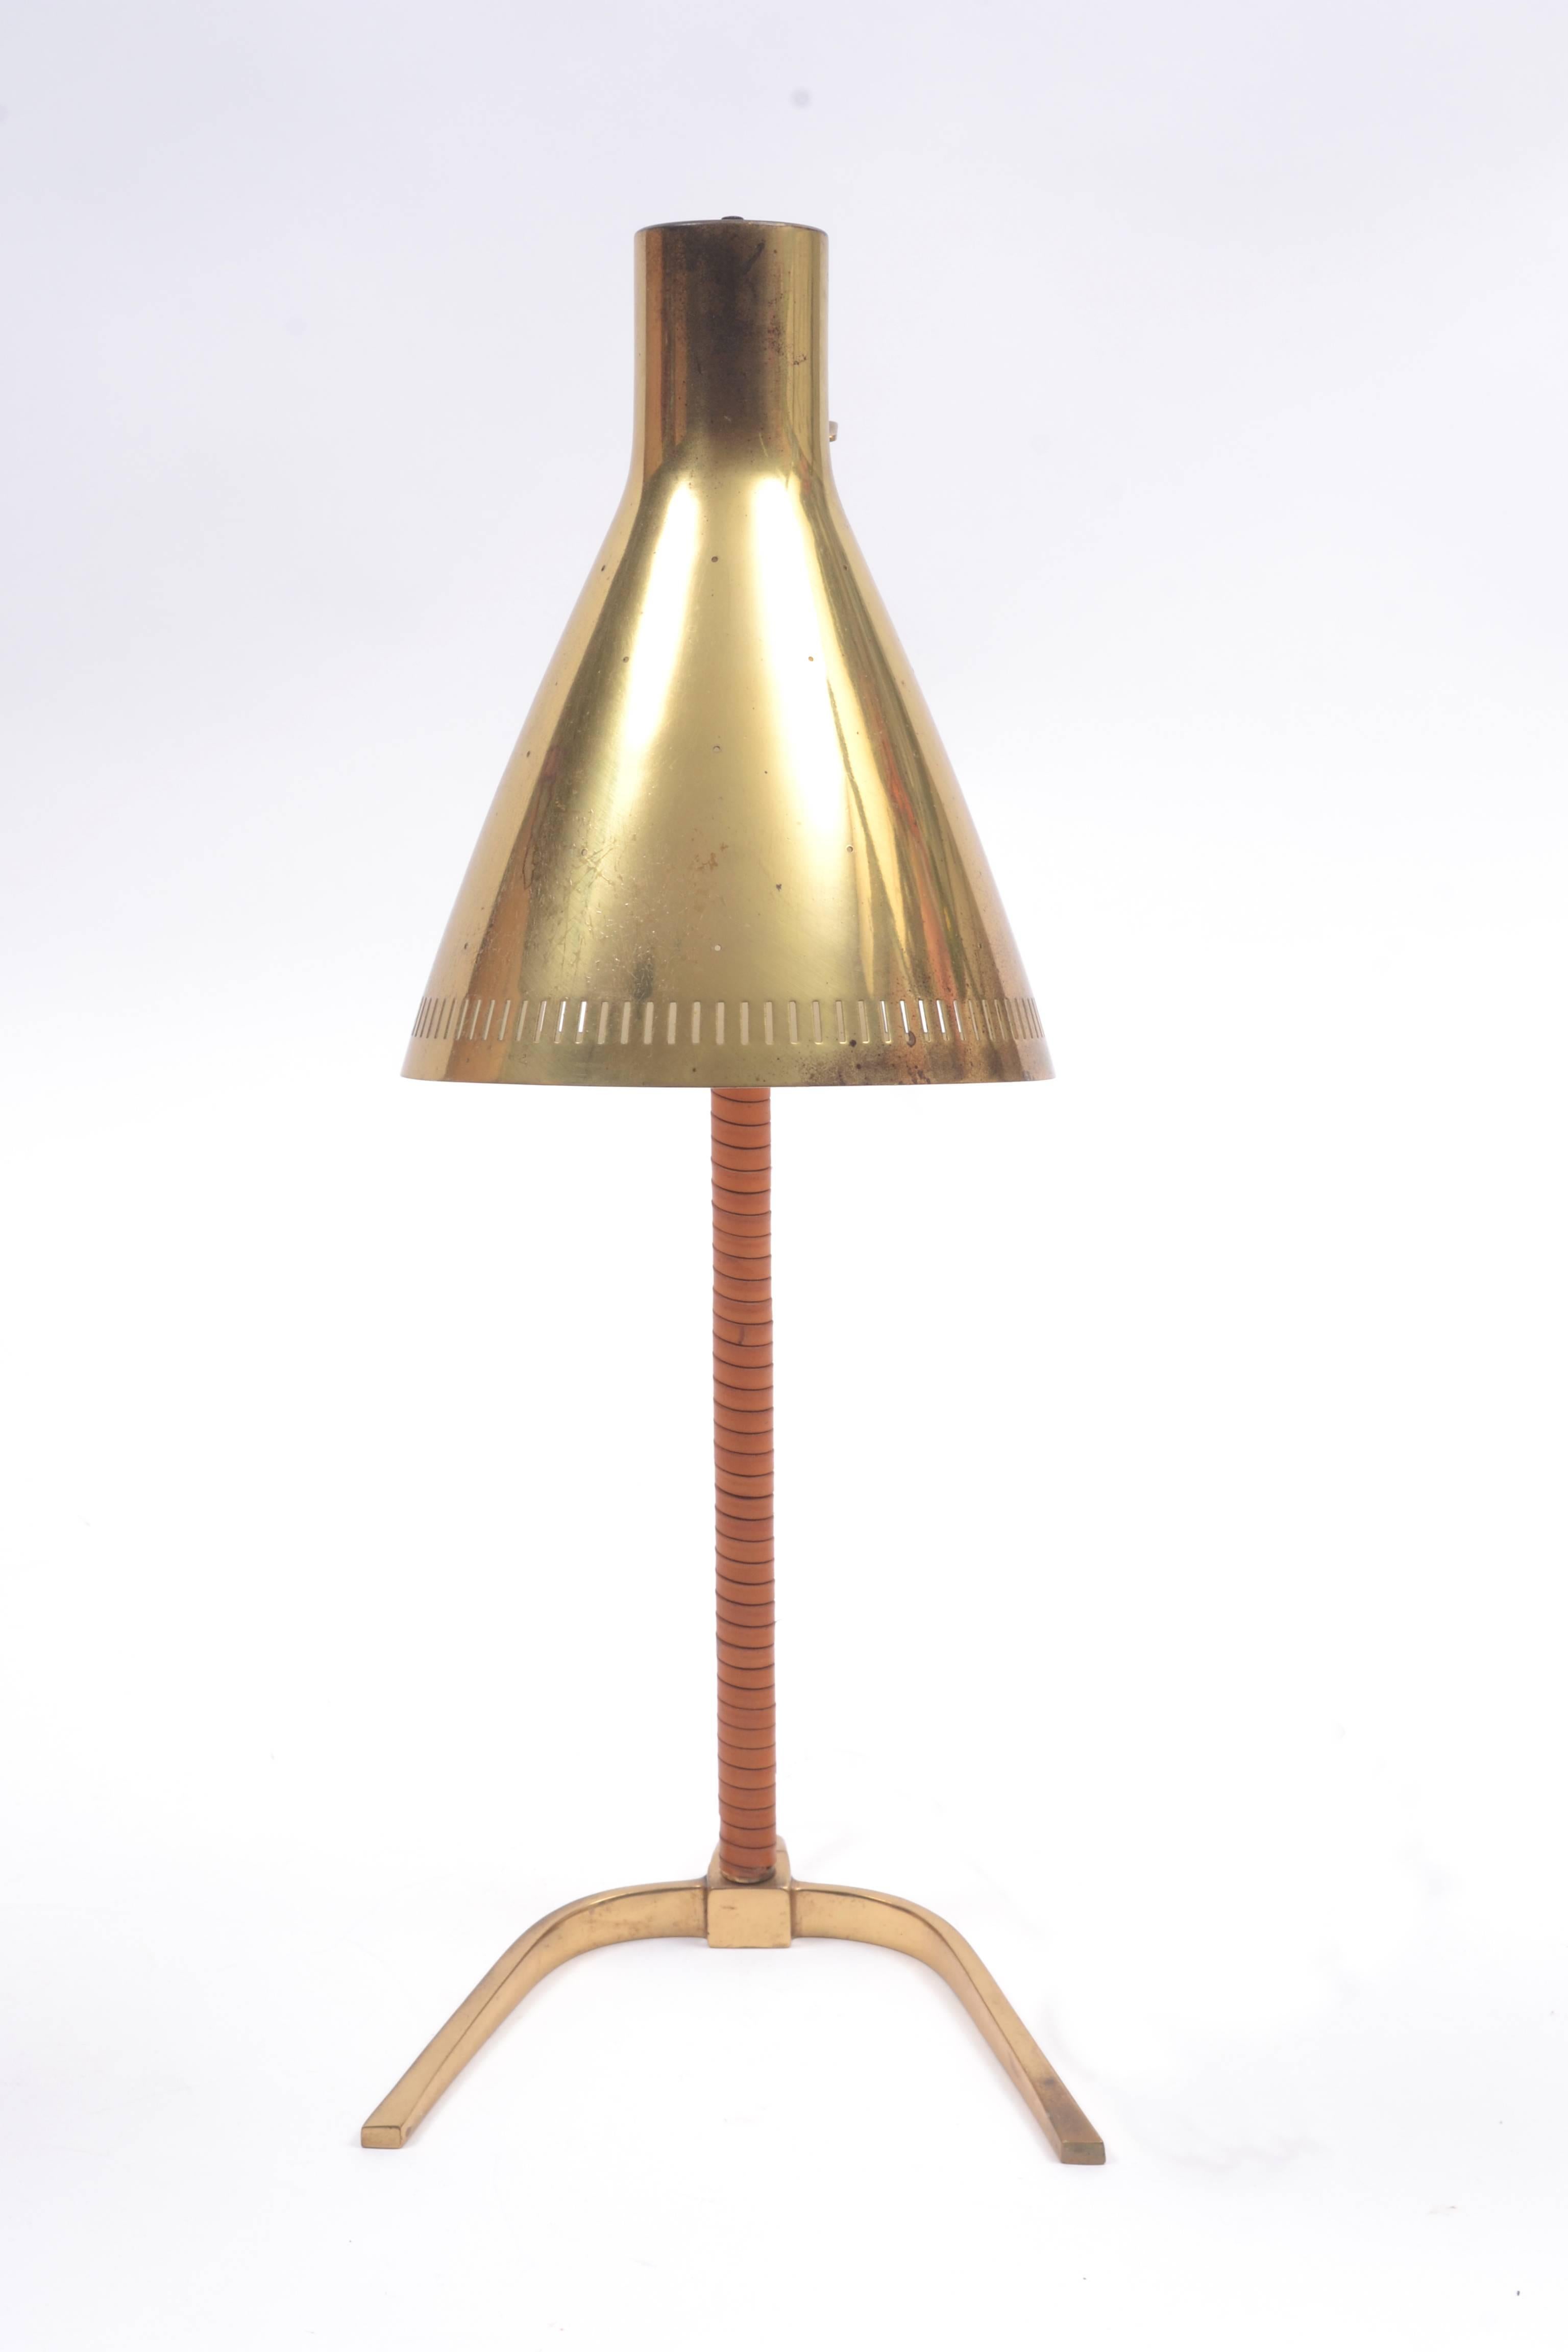 Early Paavo Tynell 9224 lamp featuring articulating, perforated brass shade with brass base and stem wrapped in leather. Bottom stamped 